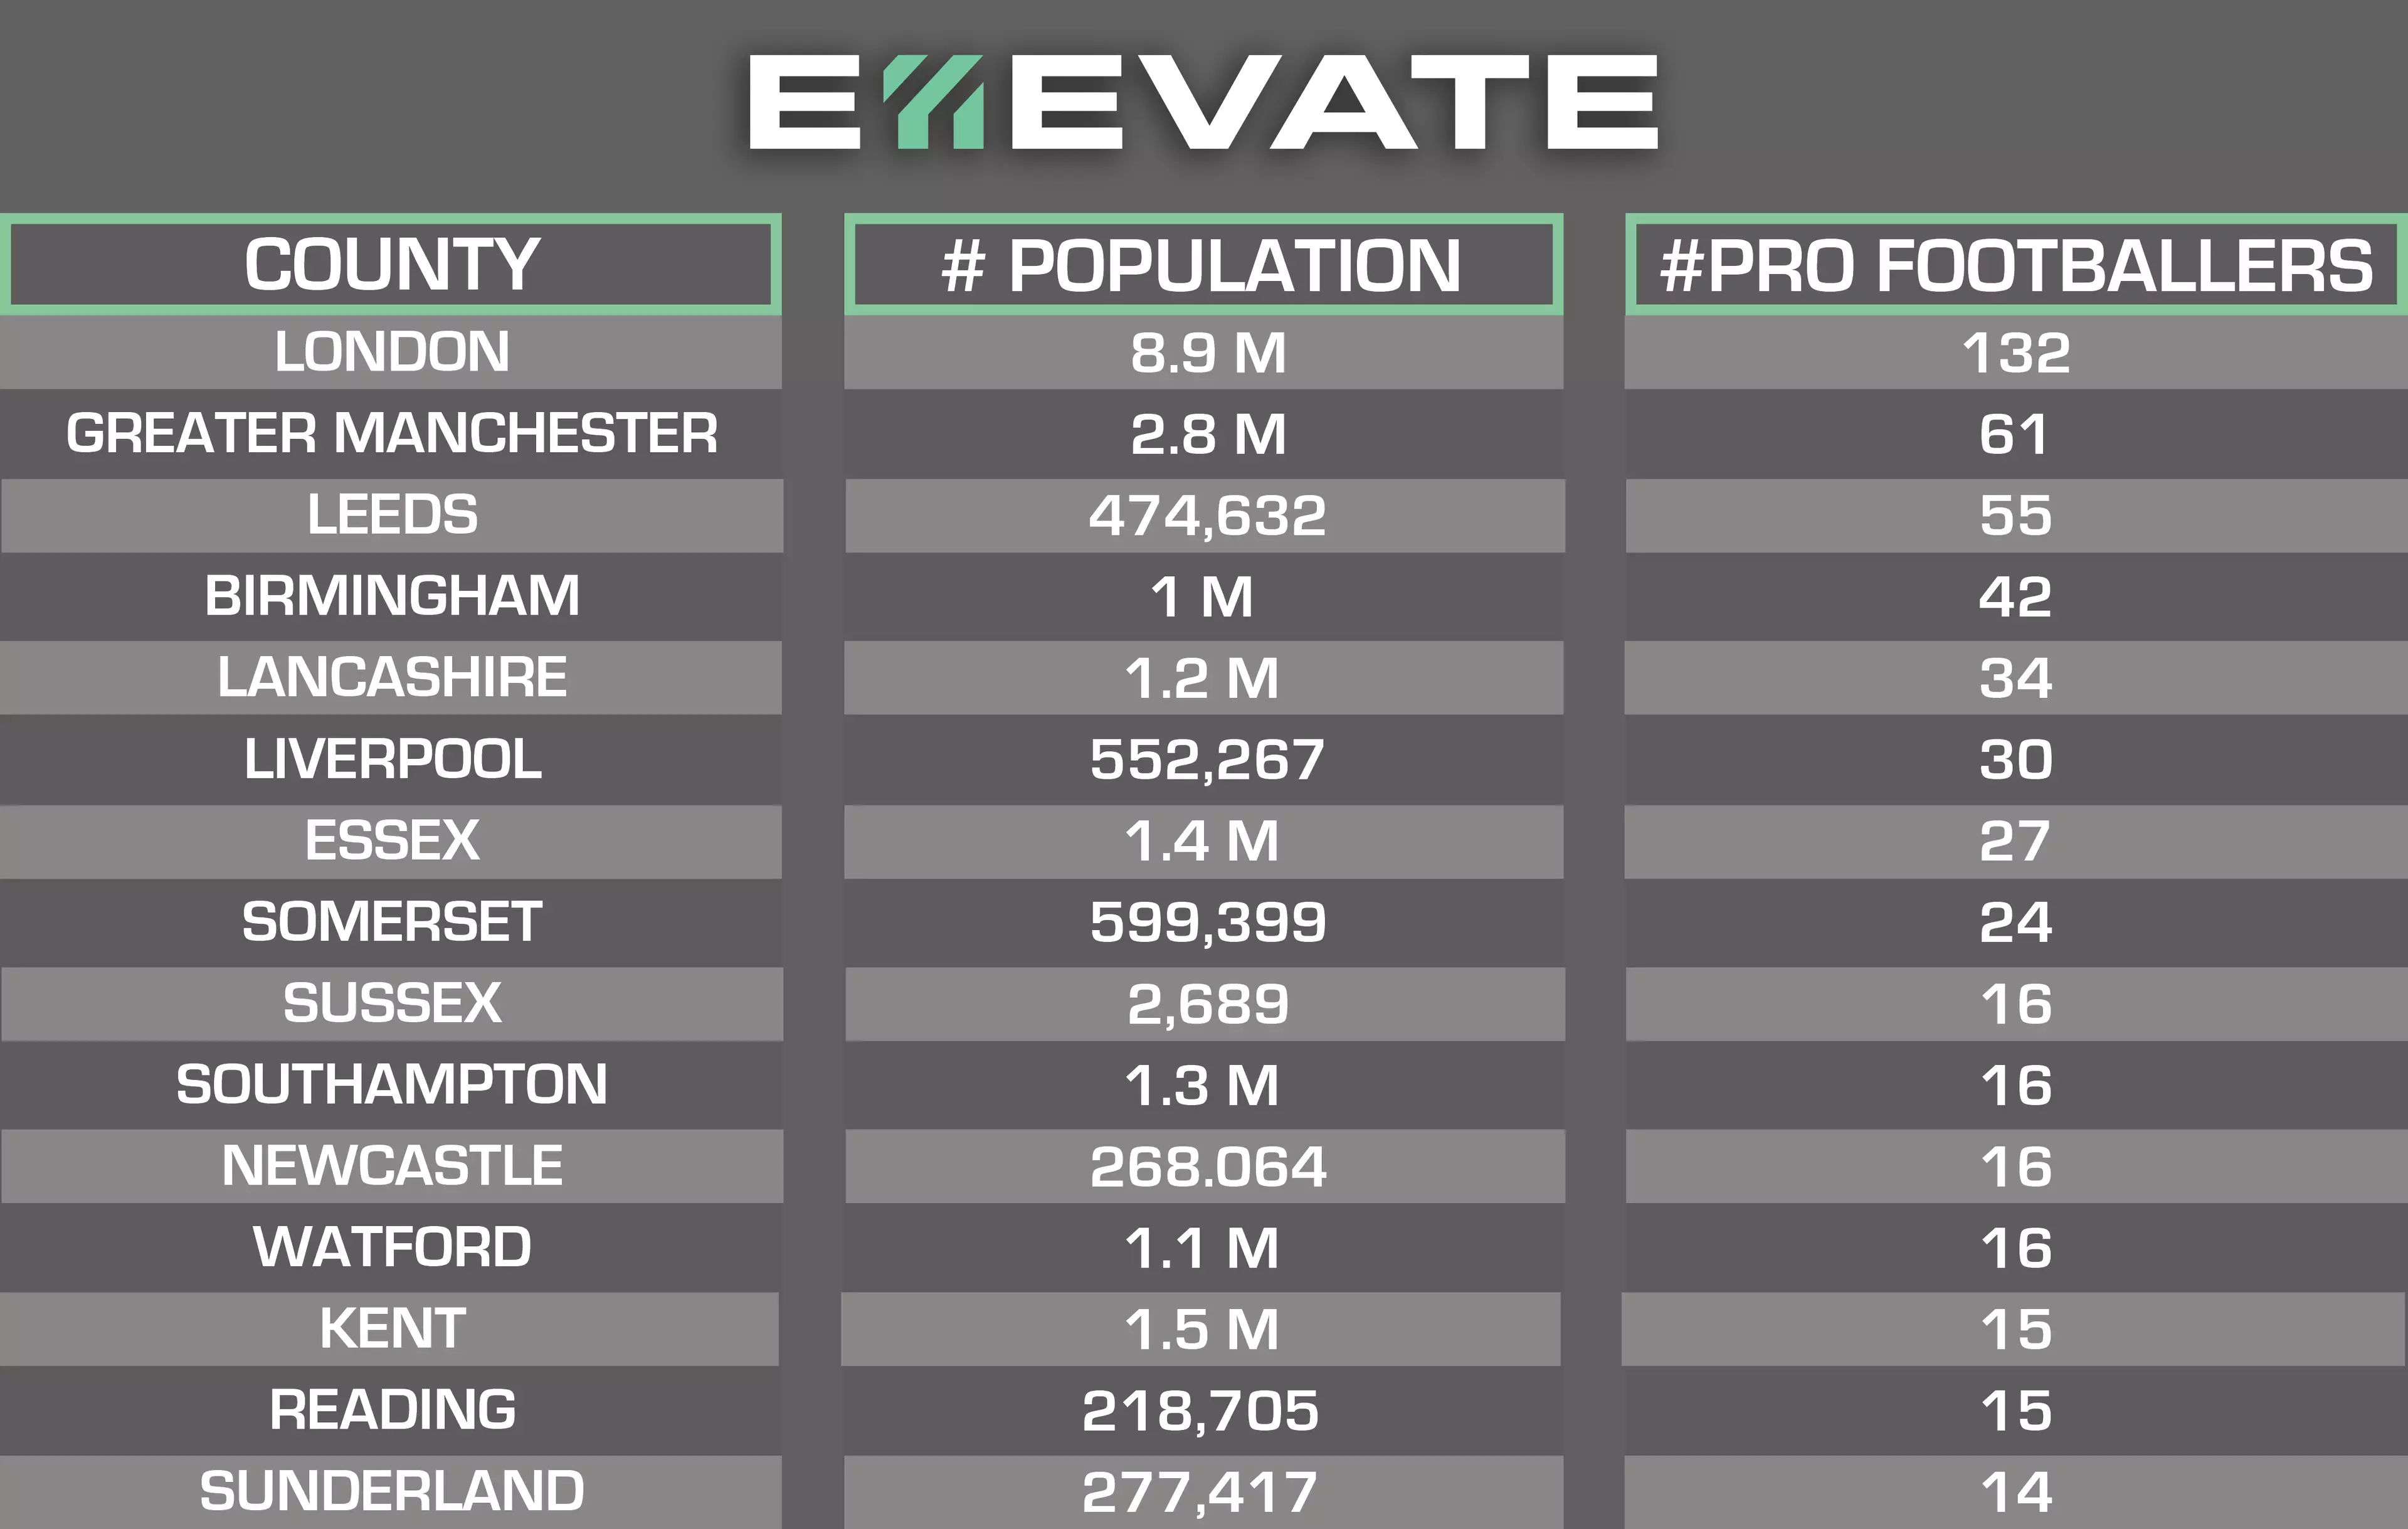 Where professional footballers are from in England. Image: E11evate